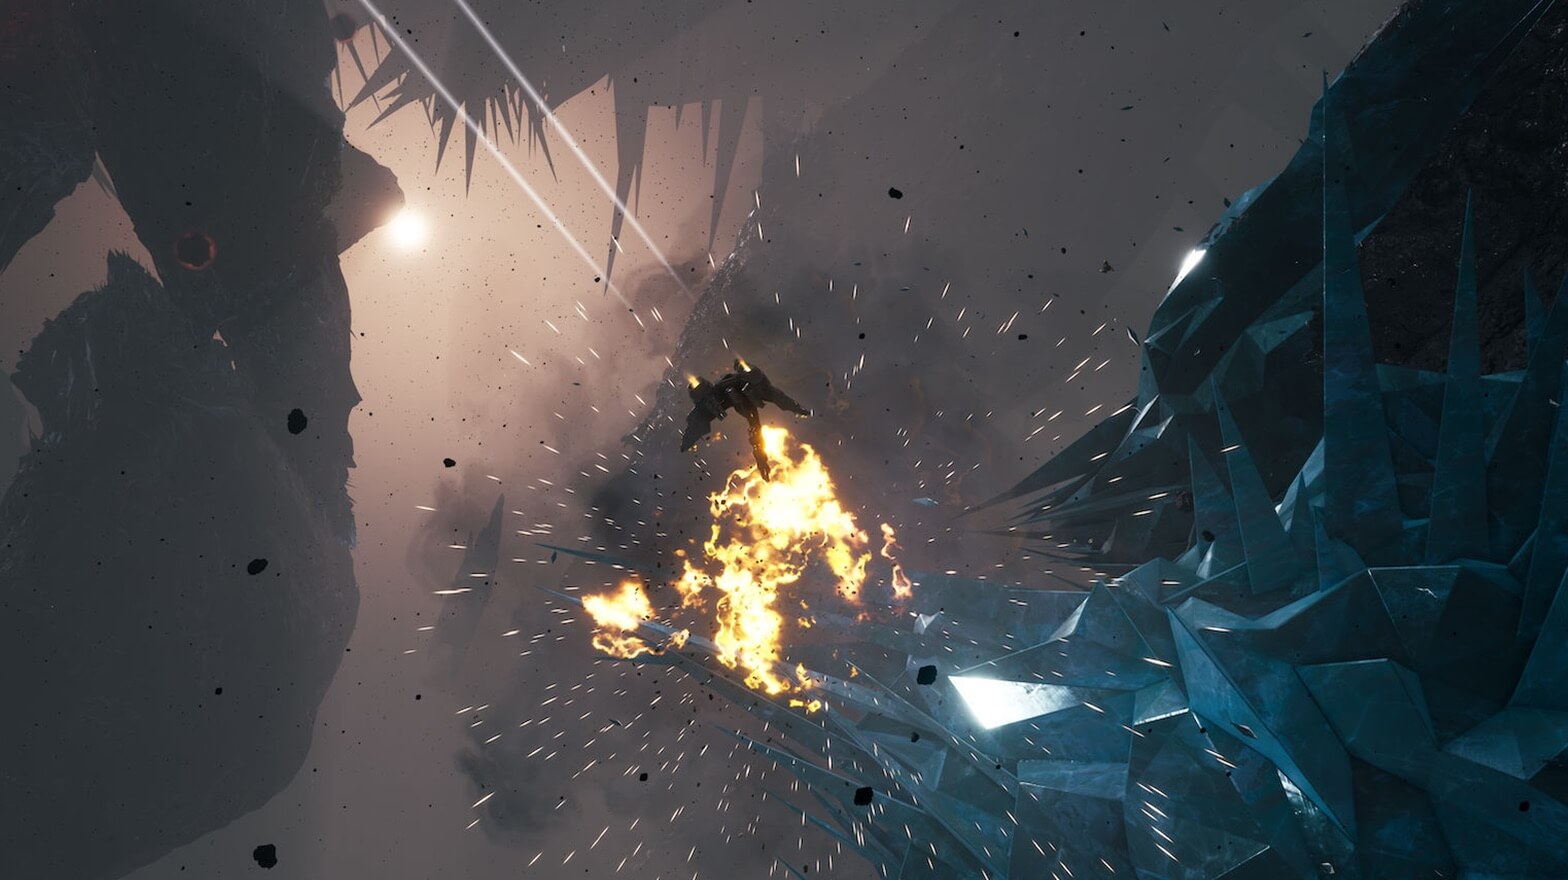 A spaceship in a battle with an explosion in the middle of the image